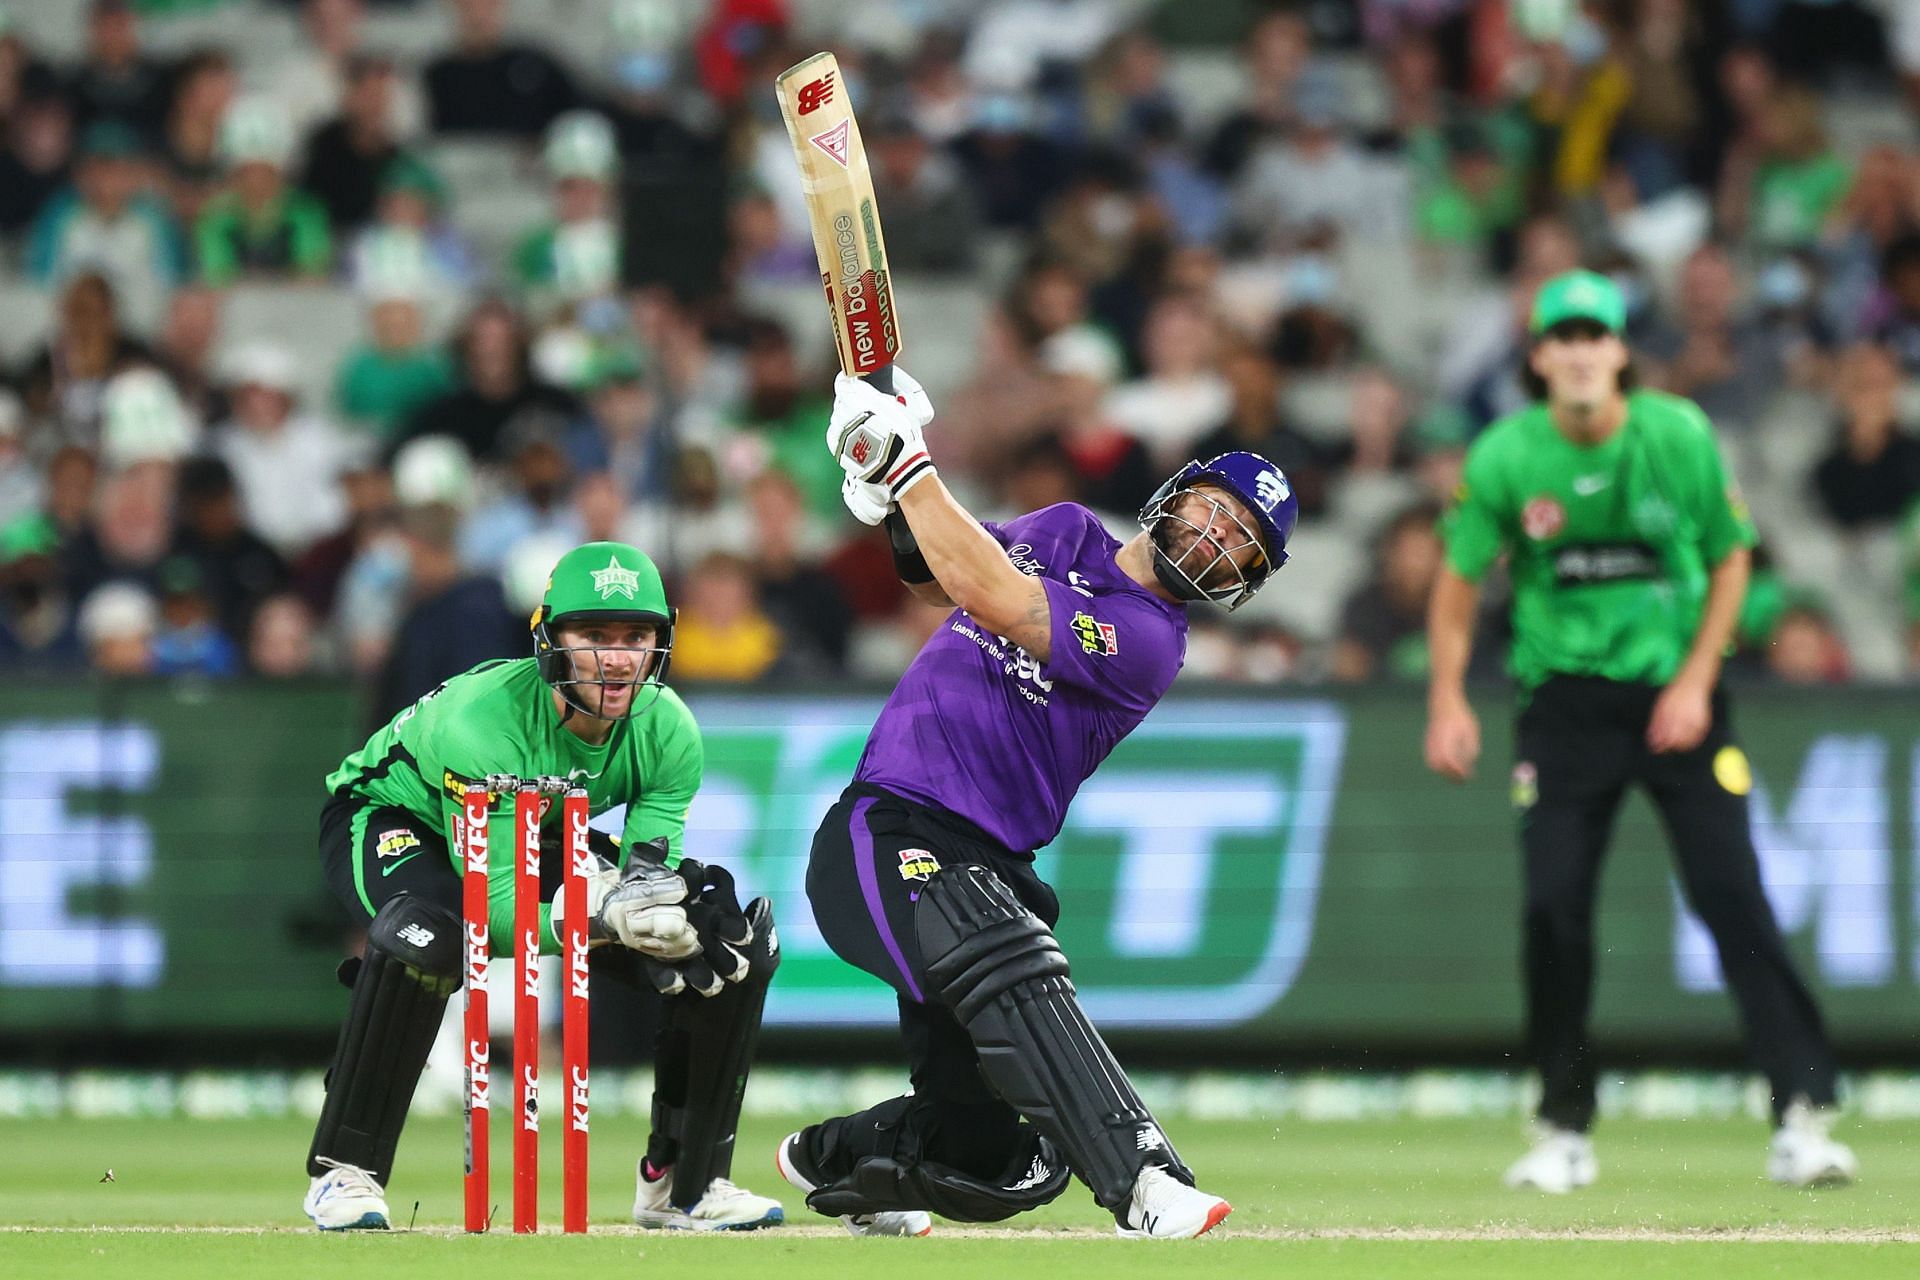 Matthew Wade in the BBL. Pic: Getty Images